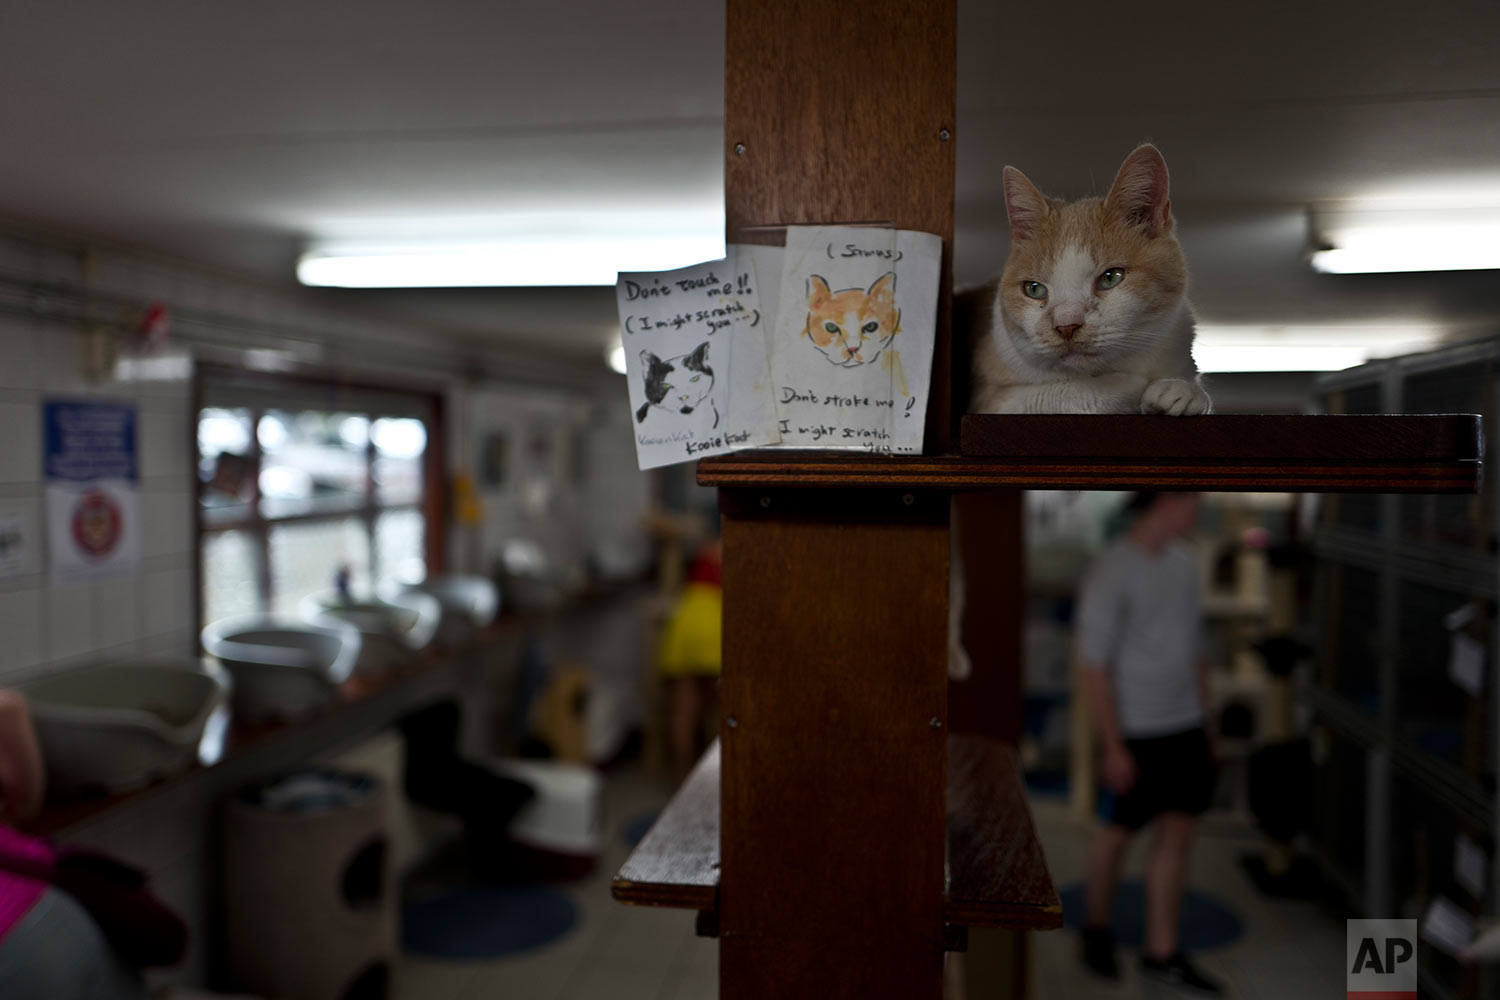  In this Saturday, July 22, 2017 photo, Samus, a ten-year-old cat rests on a shelf at the Catboat shelter in Amsterdam, Netherlands.  (AP Photo/Muhammed Muheisen) 